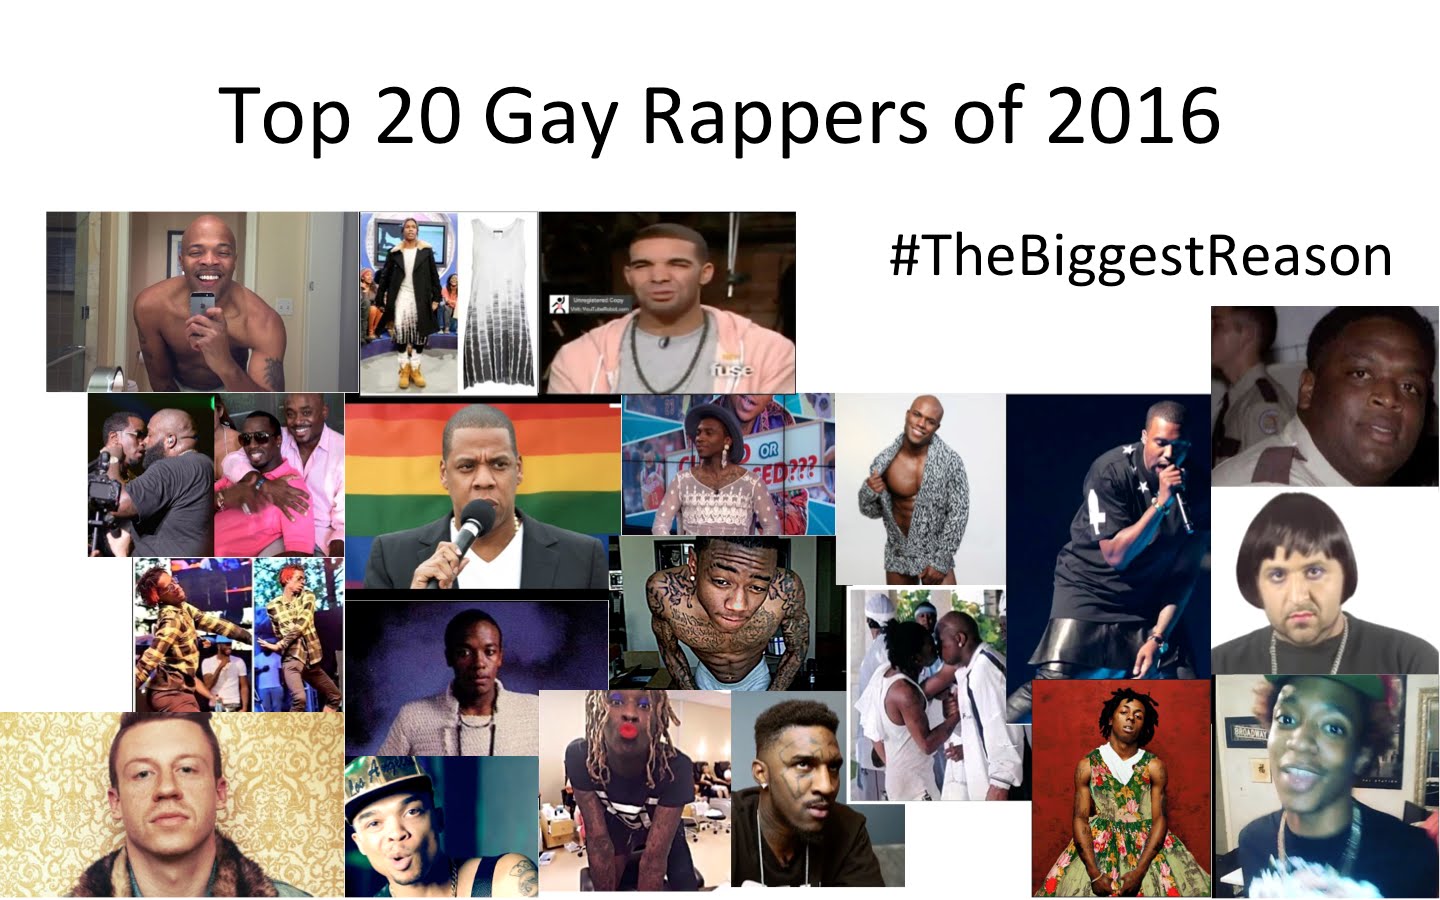 Top 20 Gay Rappers of 2016 Exposed!